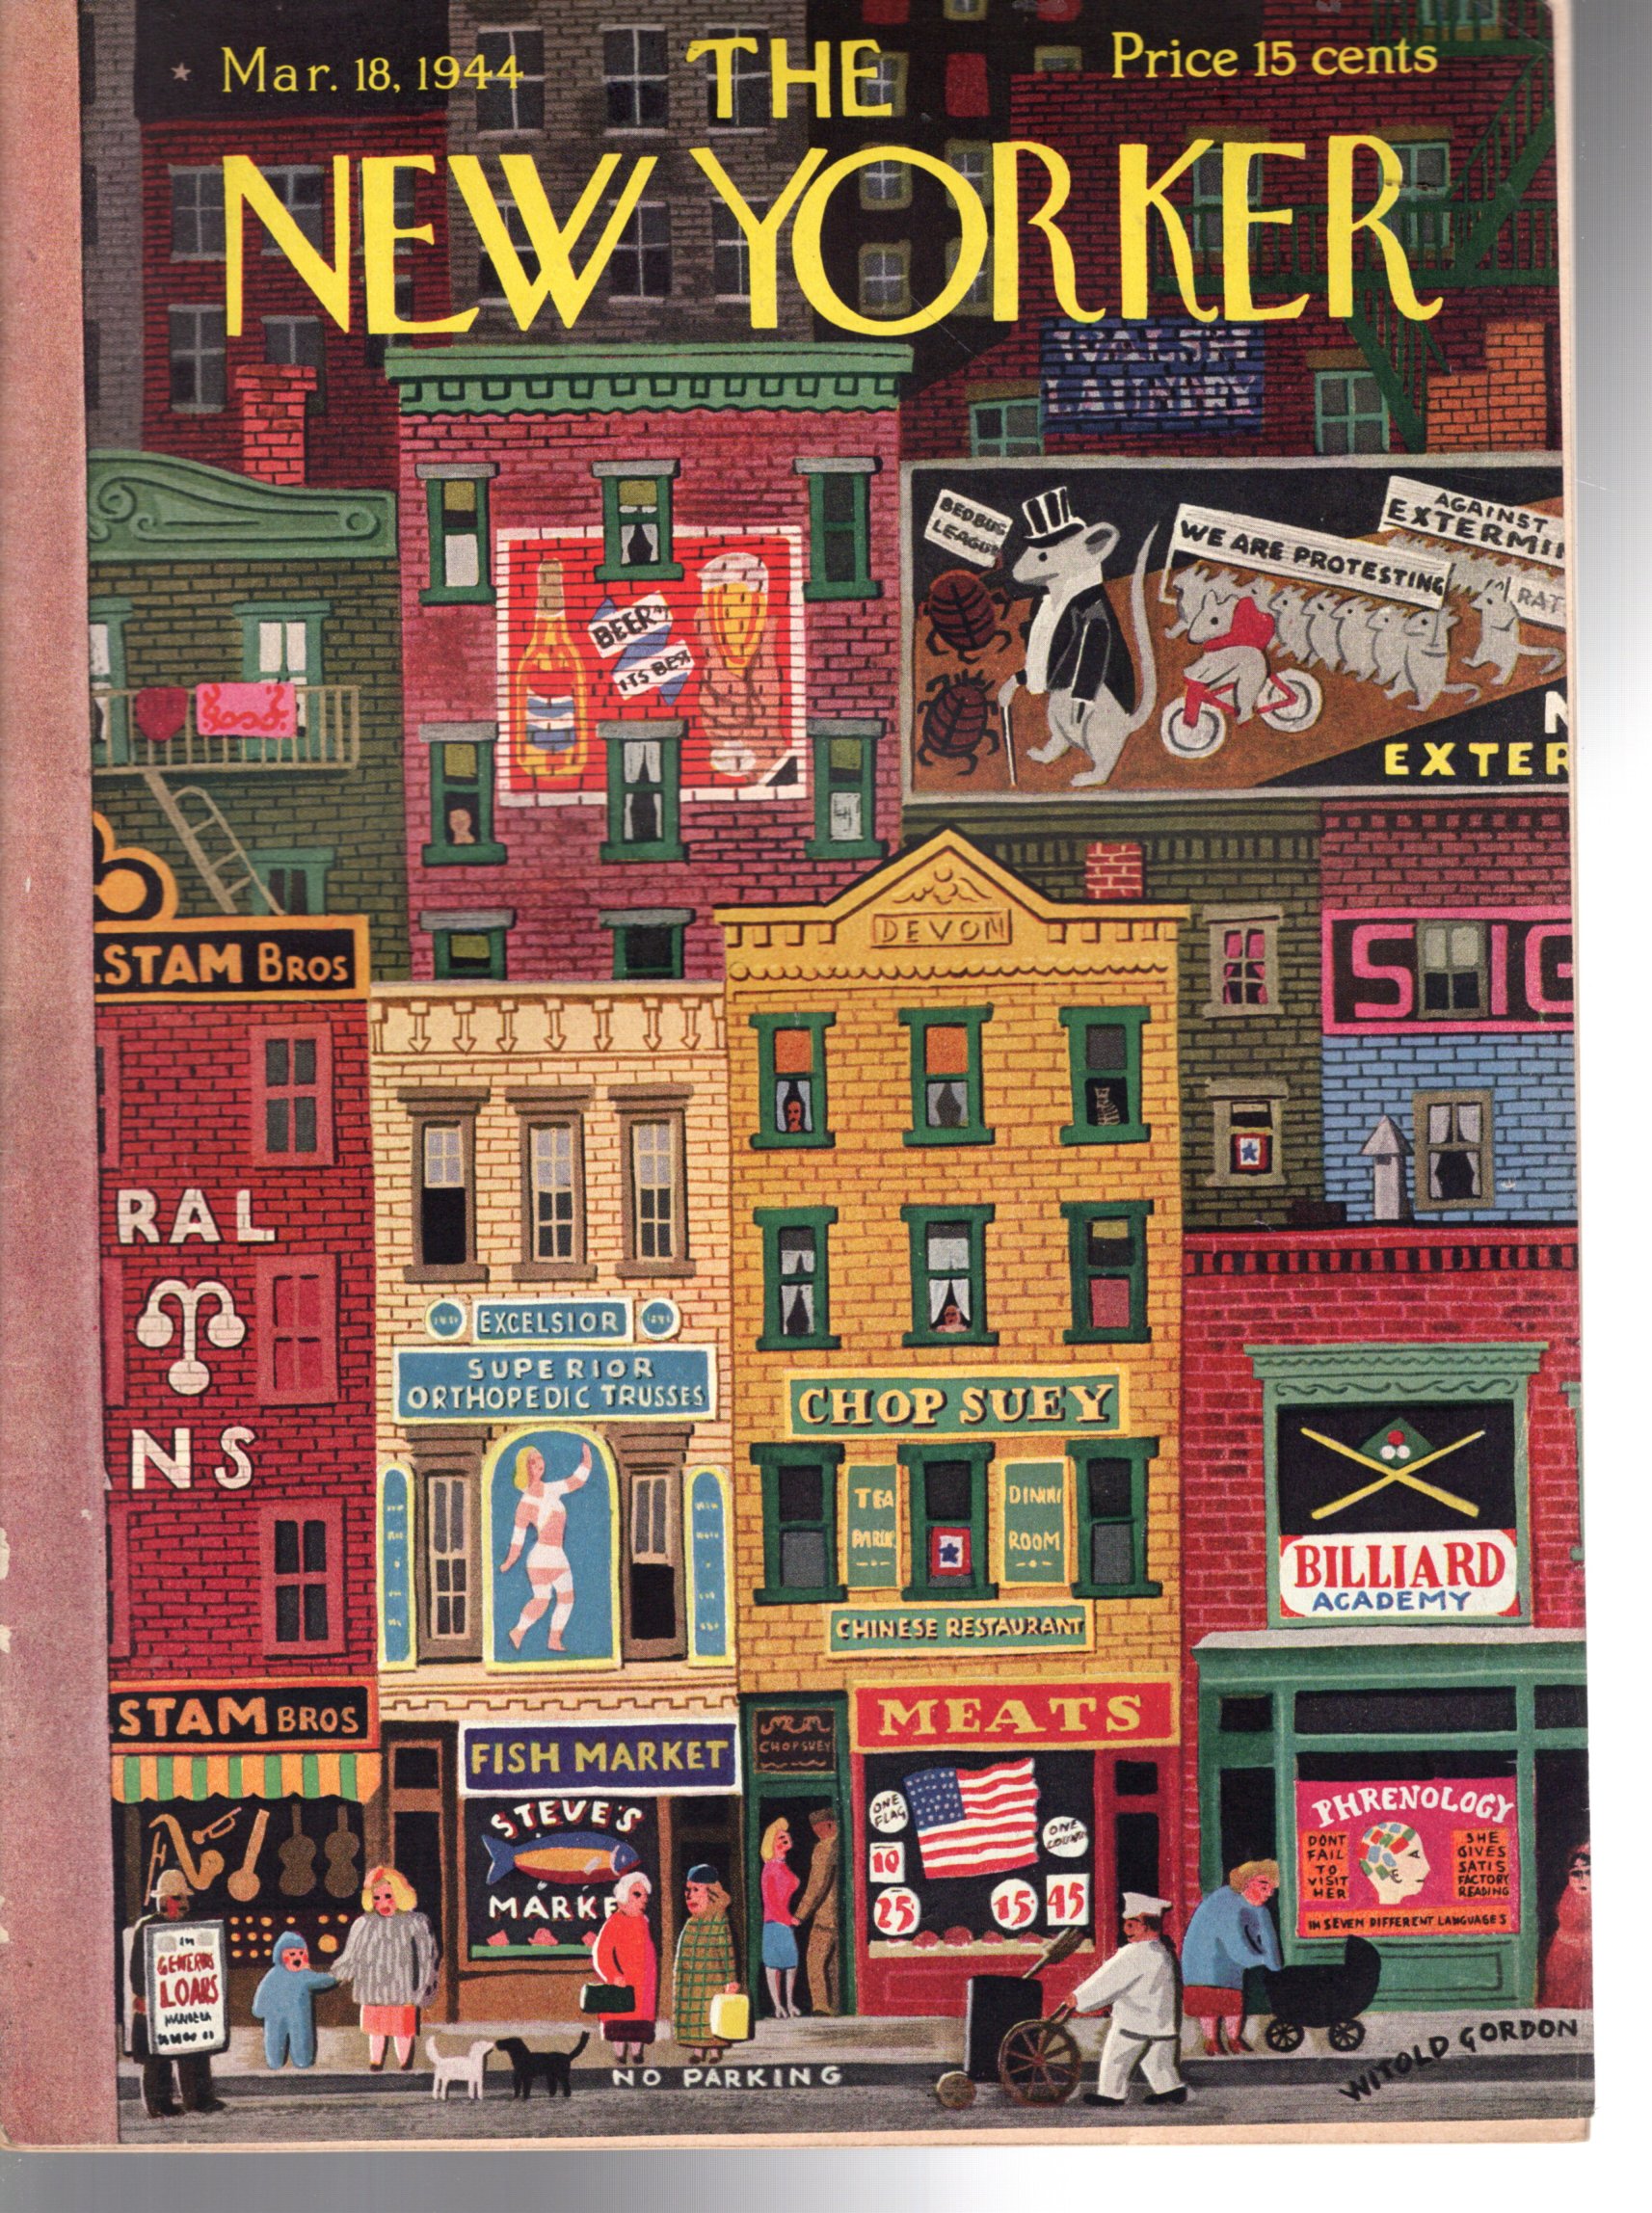 The New Yorker (Magazine) March 18, 1944 by Ross, Harold (editor